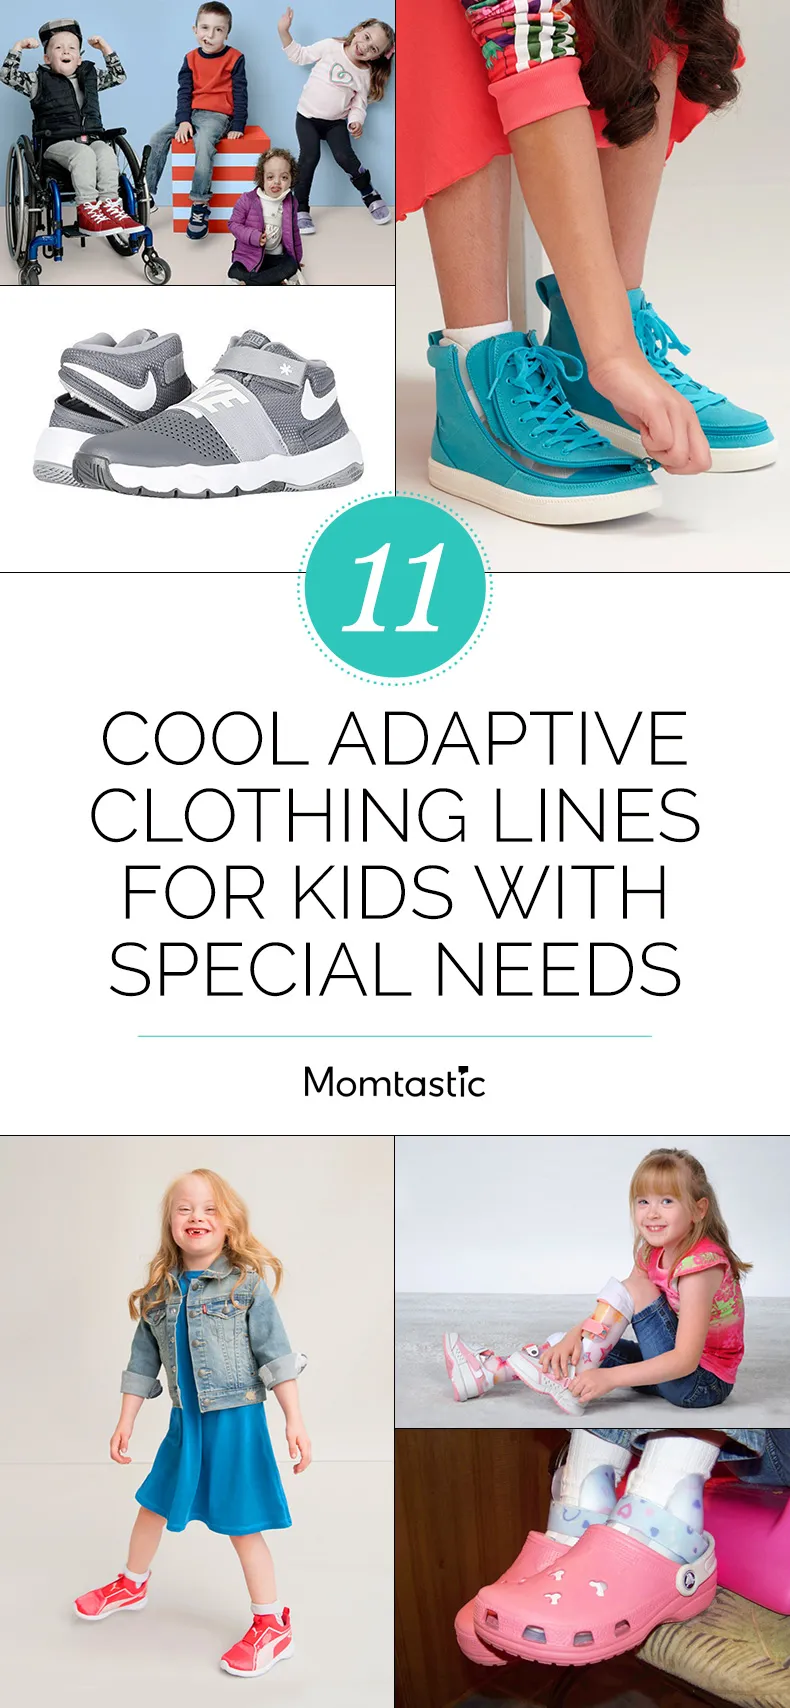 10 Cool Adaptive Clothing Lines for Kids With Special Needs